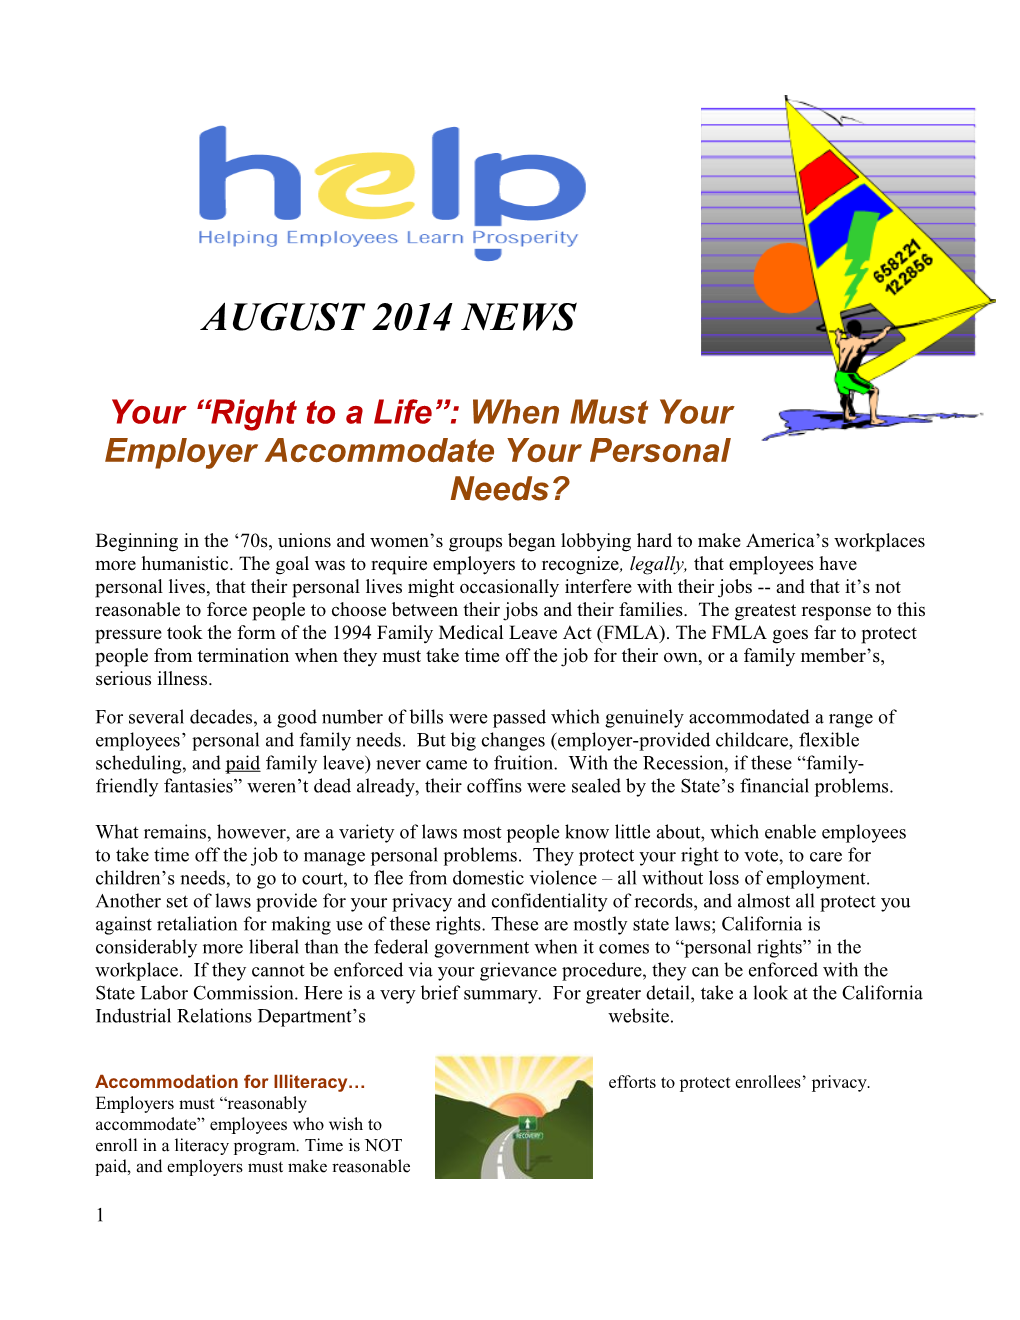 Your Right to a Life :When Must Your Employer Accommodate Your Personal Needs?